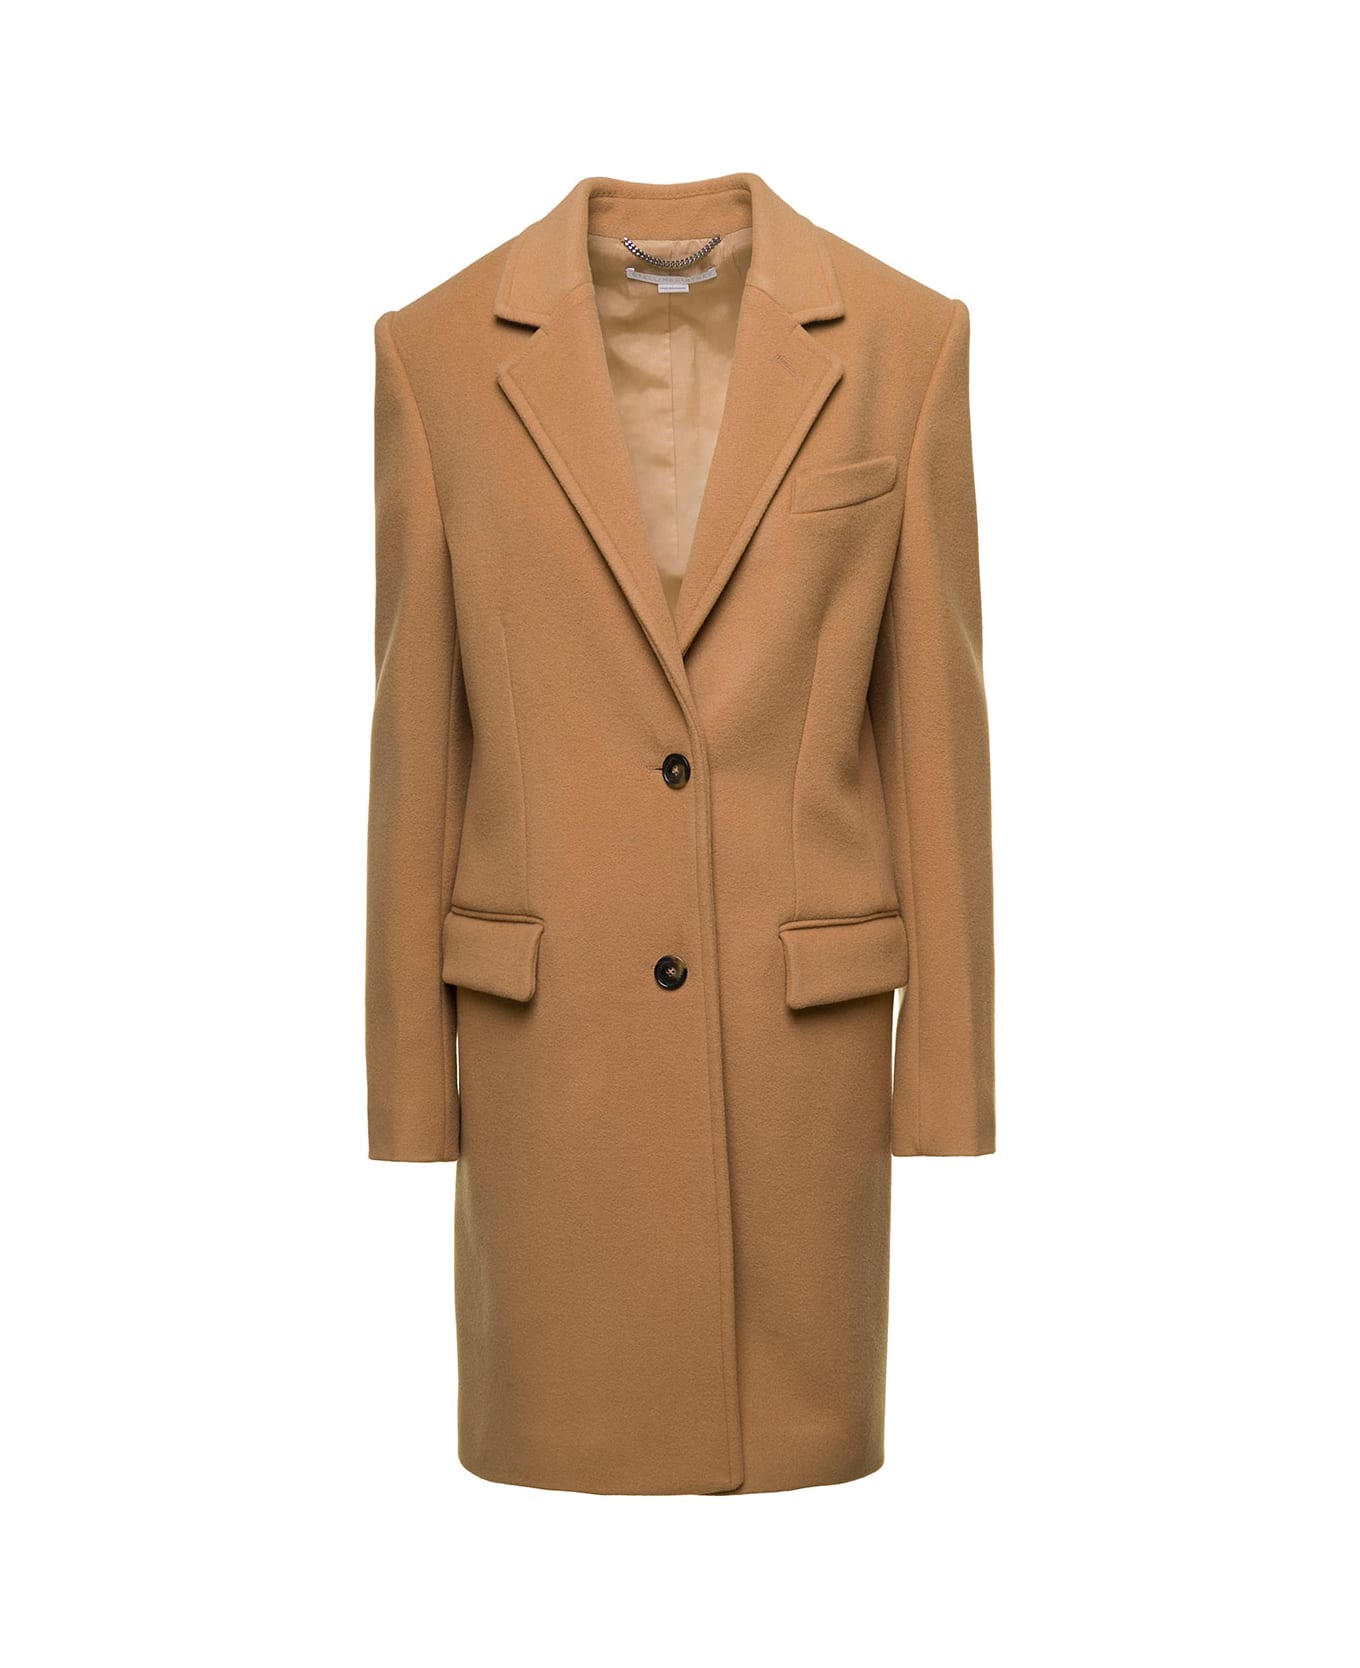 Stella McCartney Structured Single-breasted Coat With Notched Revers In Wool - Beige コート